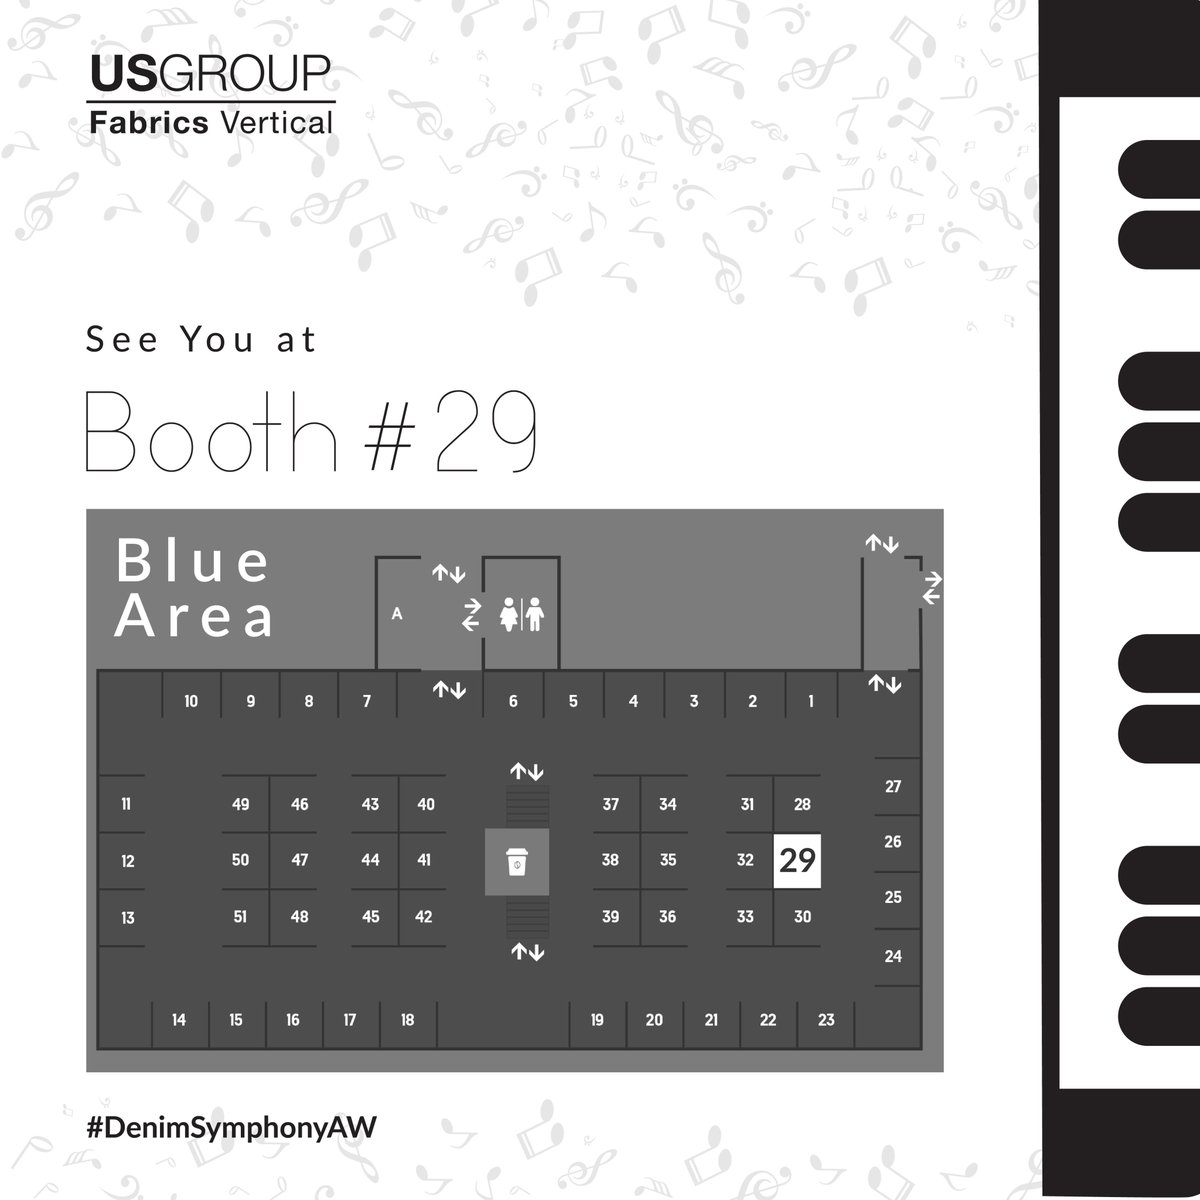 Let's connect with each other straight from booth #29, Blue Area @KingpinsShow Amsterdam on April 12-13, 2023 to delve into “Denim Symphony”!

#usgroup #denimsymphonyAW #autumnwinter24 #sustainabledenimfashion #kingpins #denimfashion #denimvibes #amsterdam